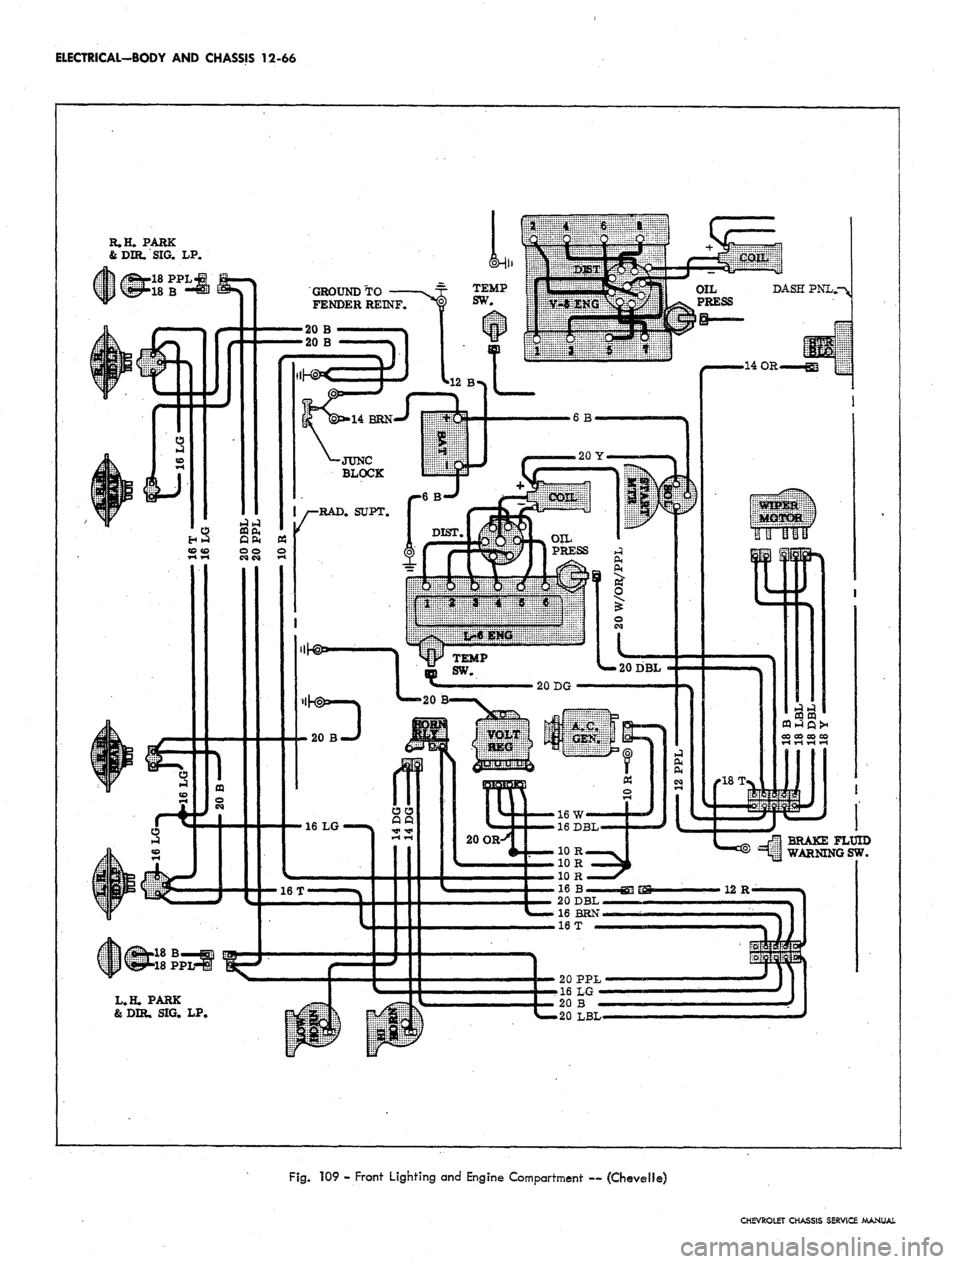 CHEVROLET CAMARO 1967 1.G Chassis Workshop Manual 
ELECTRICAL-BODY
 AND
 CHASSIS
 12-66

R.H. PARK

&DIR.
 SIG. LP

L.H. PARK

& DQU SIG.
 LP, 
GROUND
 TO

FENDER REINF

BRAKE FLUID

ill WARNING SW.

Fig.
 109 - Front Lighting and Engine Compartment 